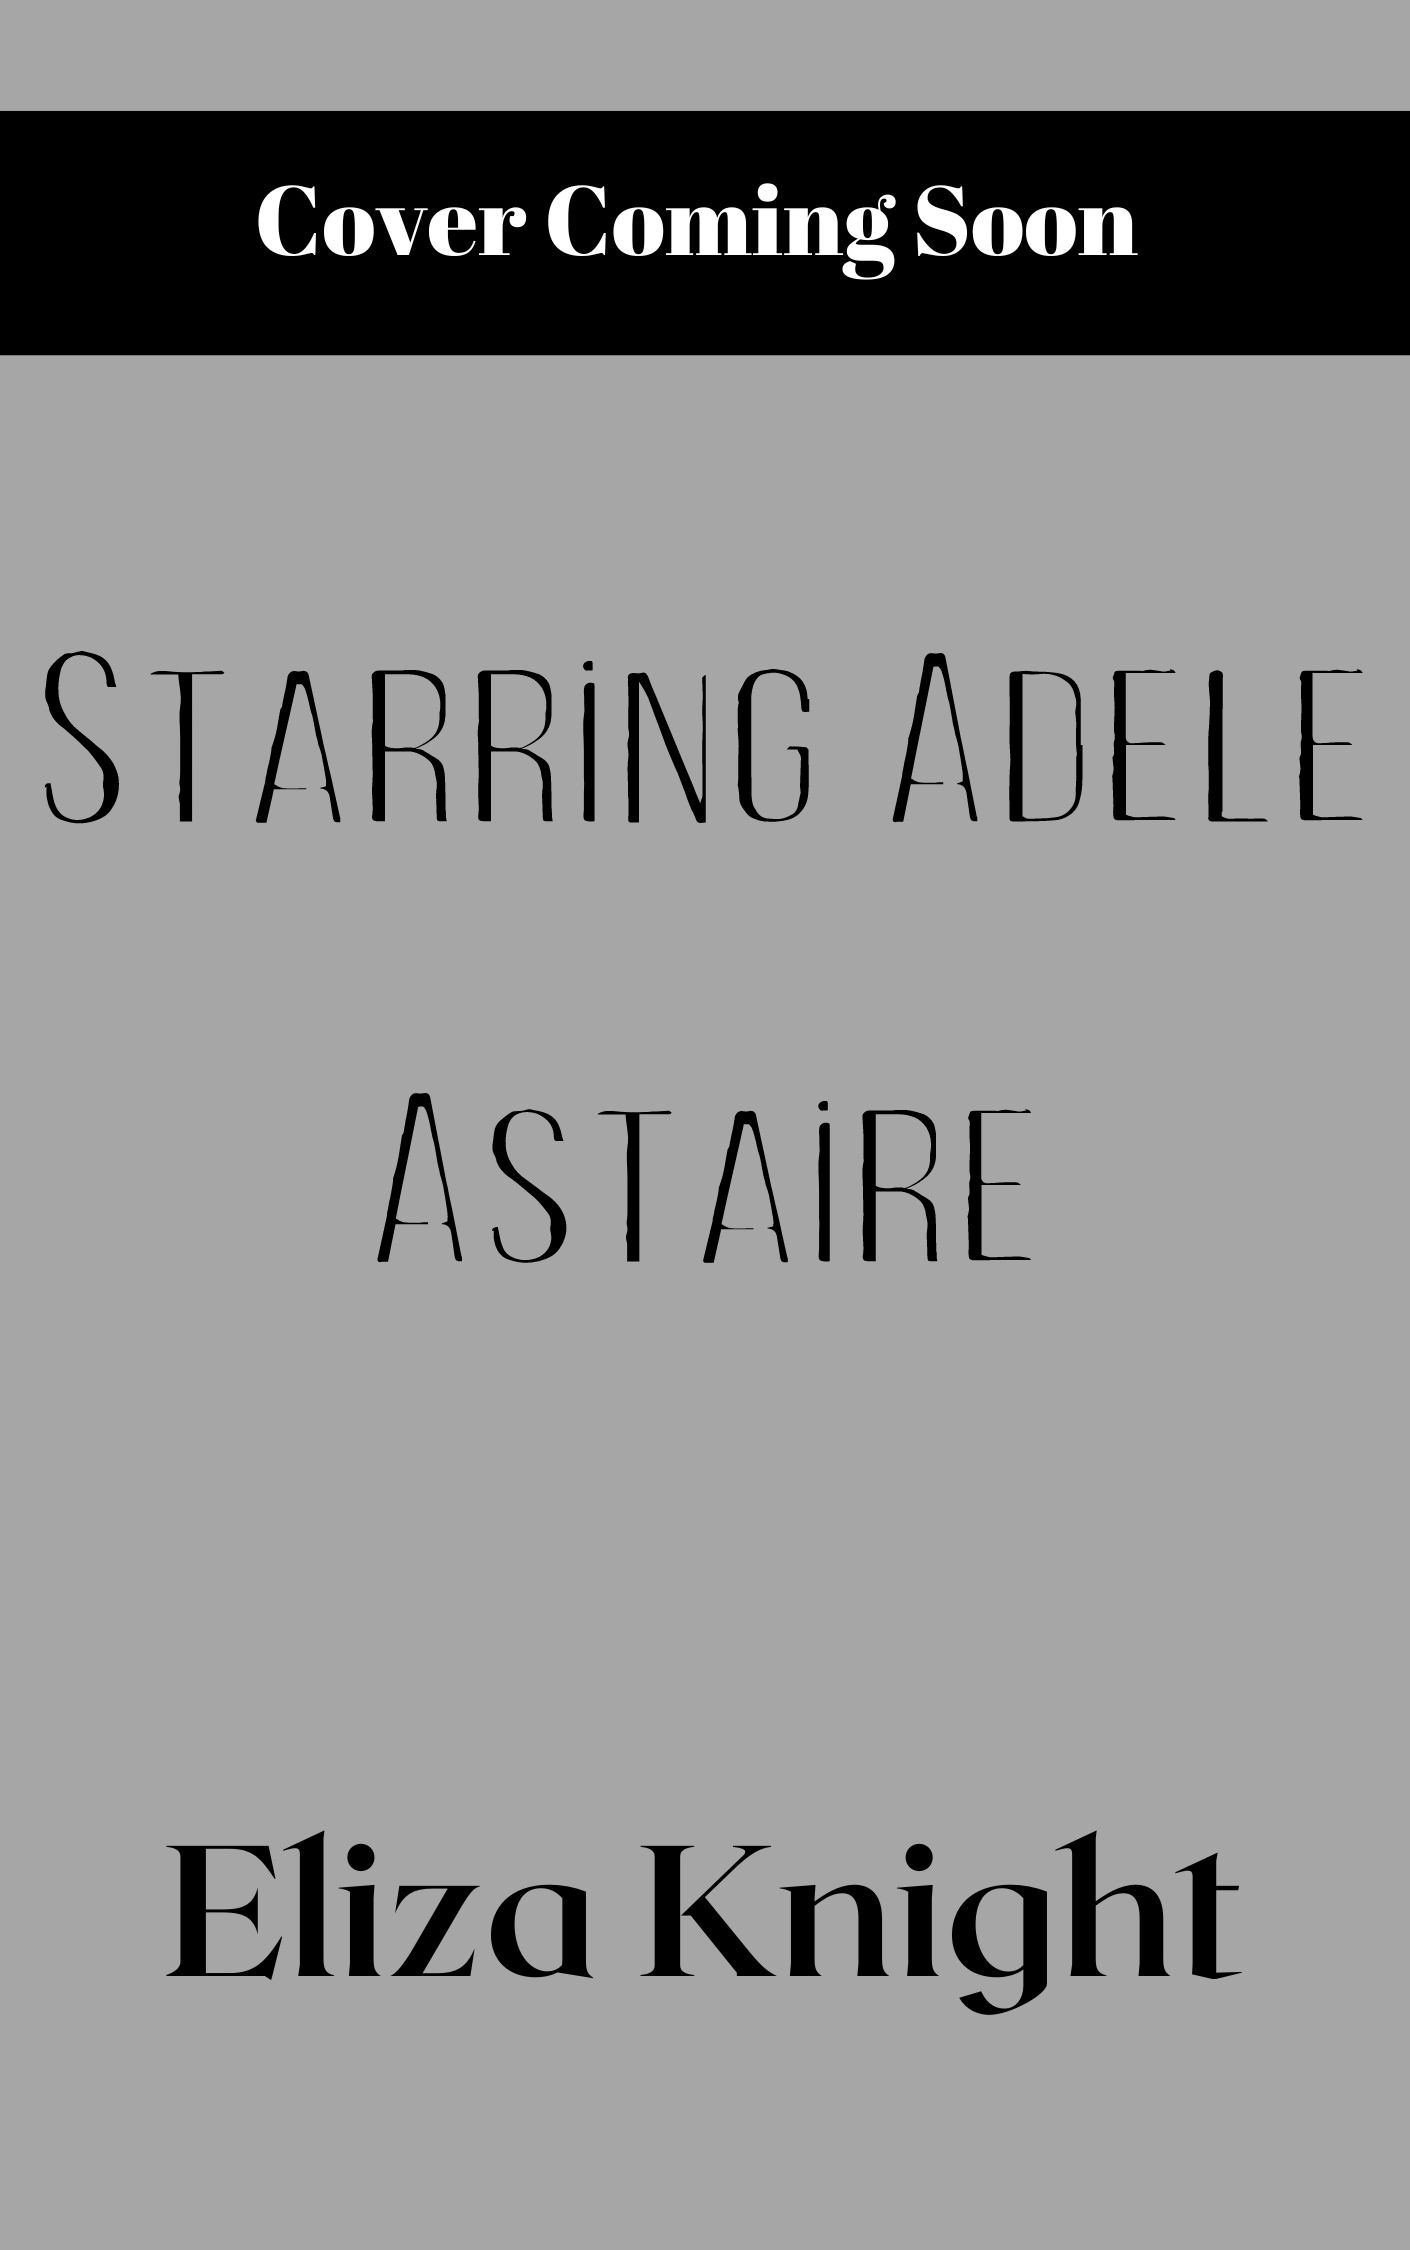 Starring Adele Astaire-2